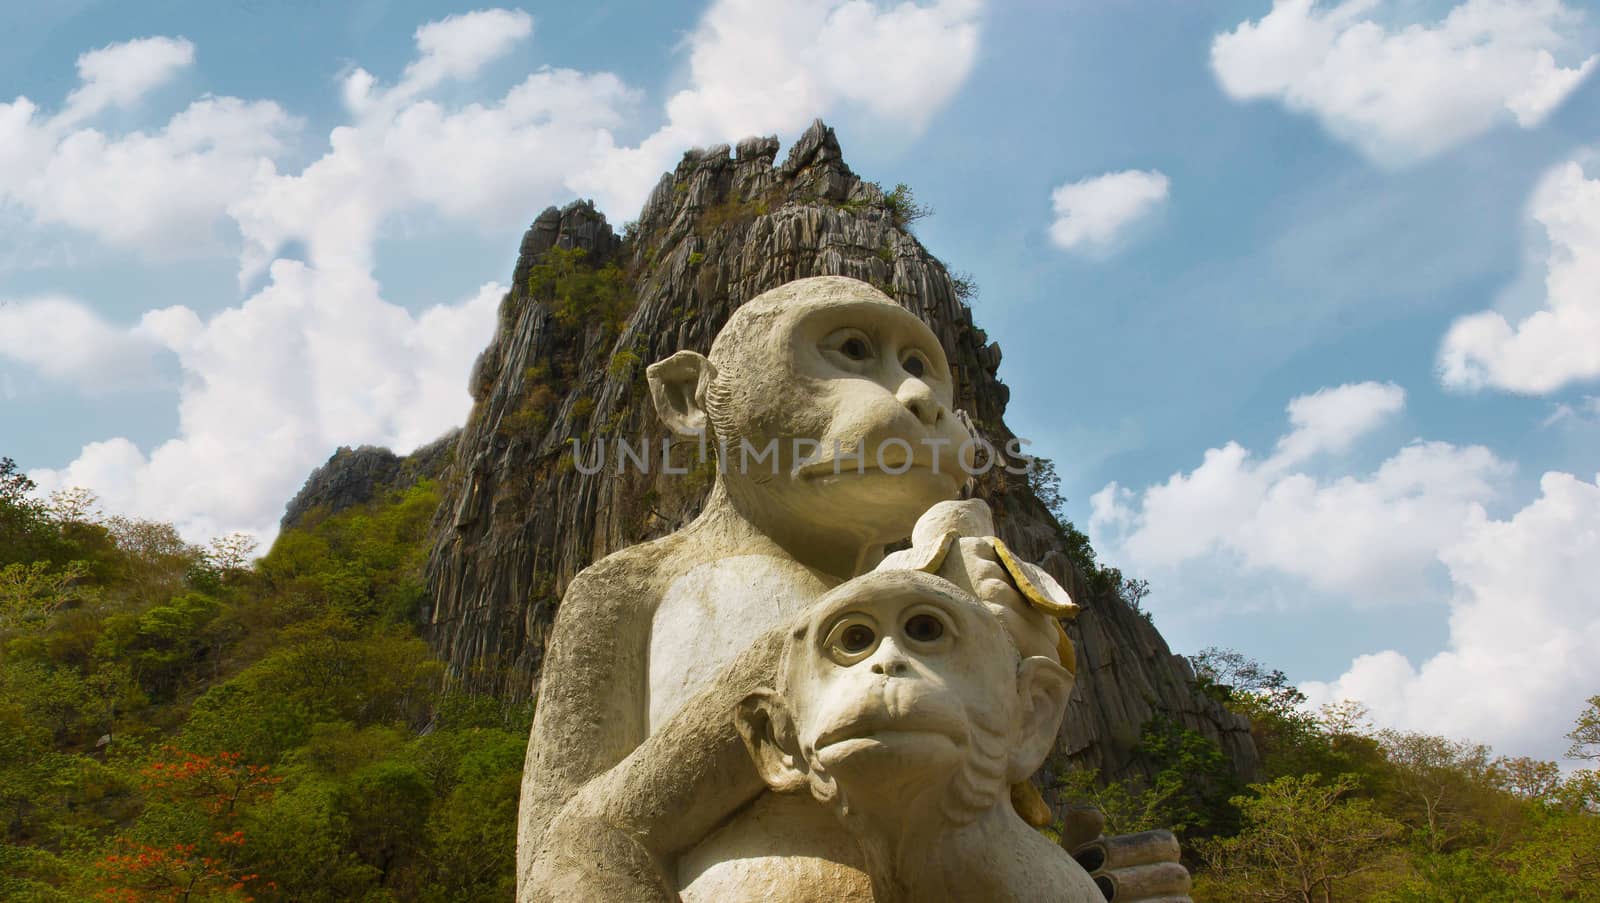 Monkey mother and child statue by sutipp11